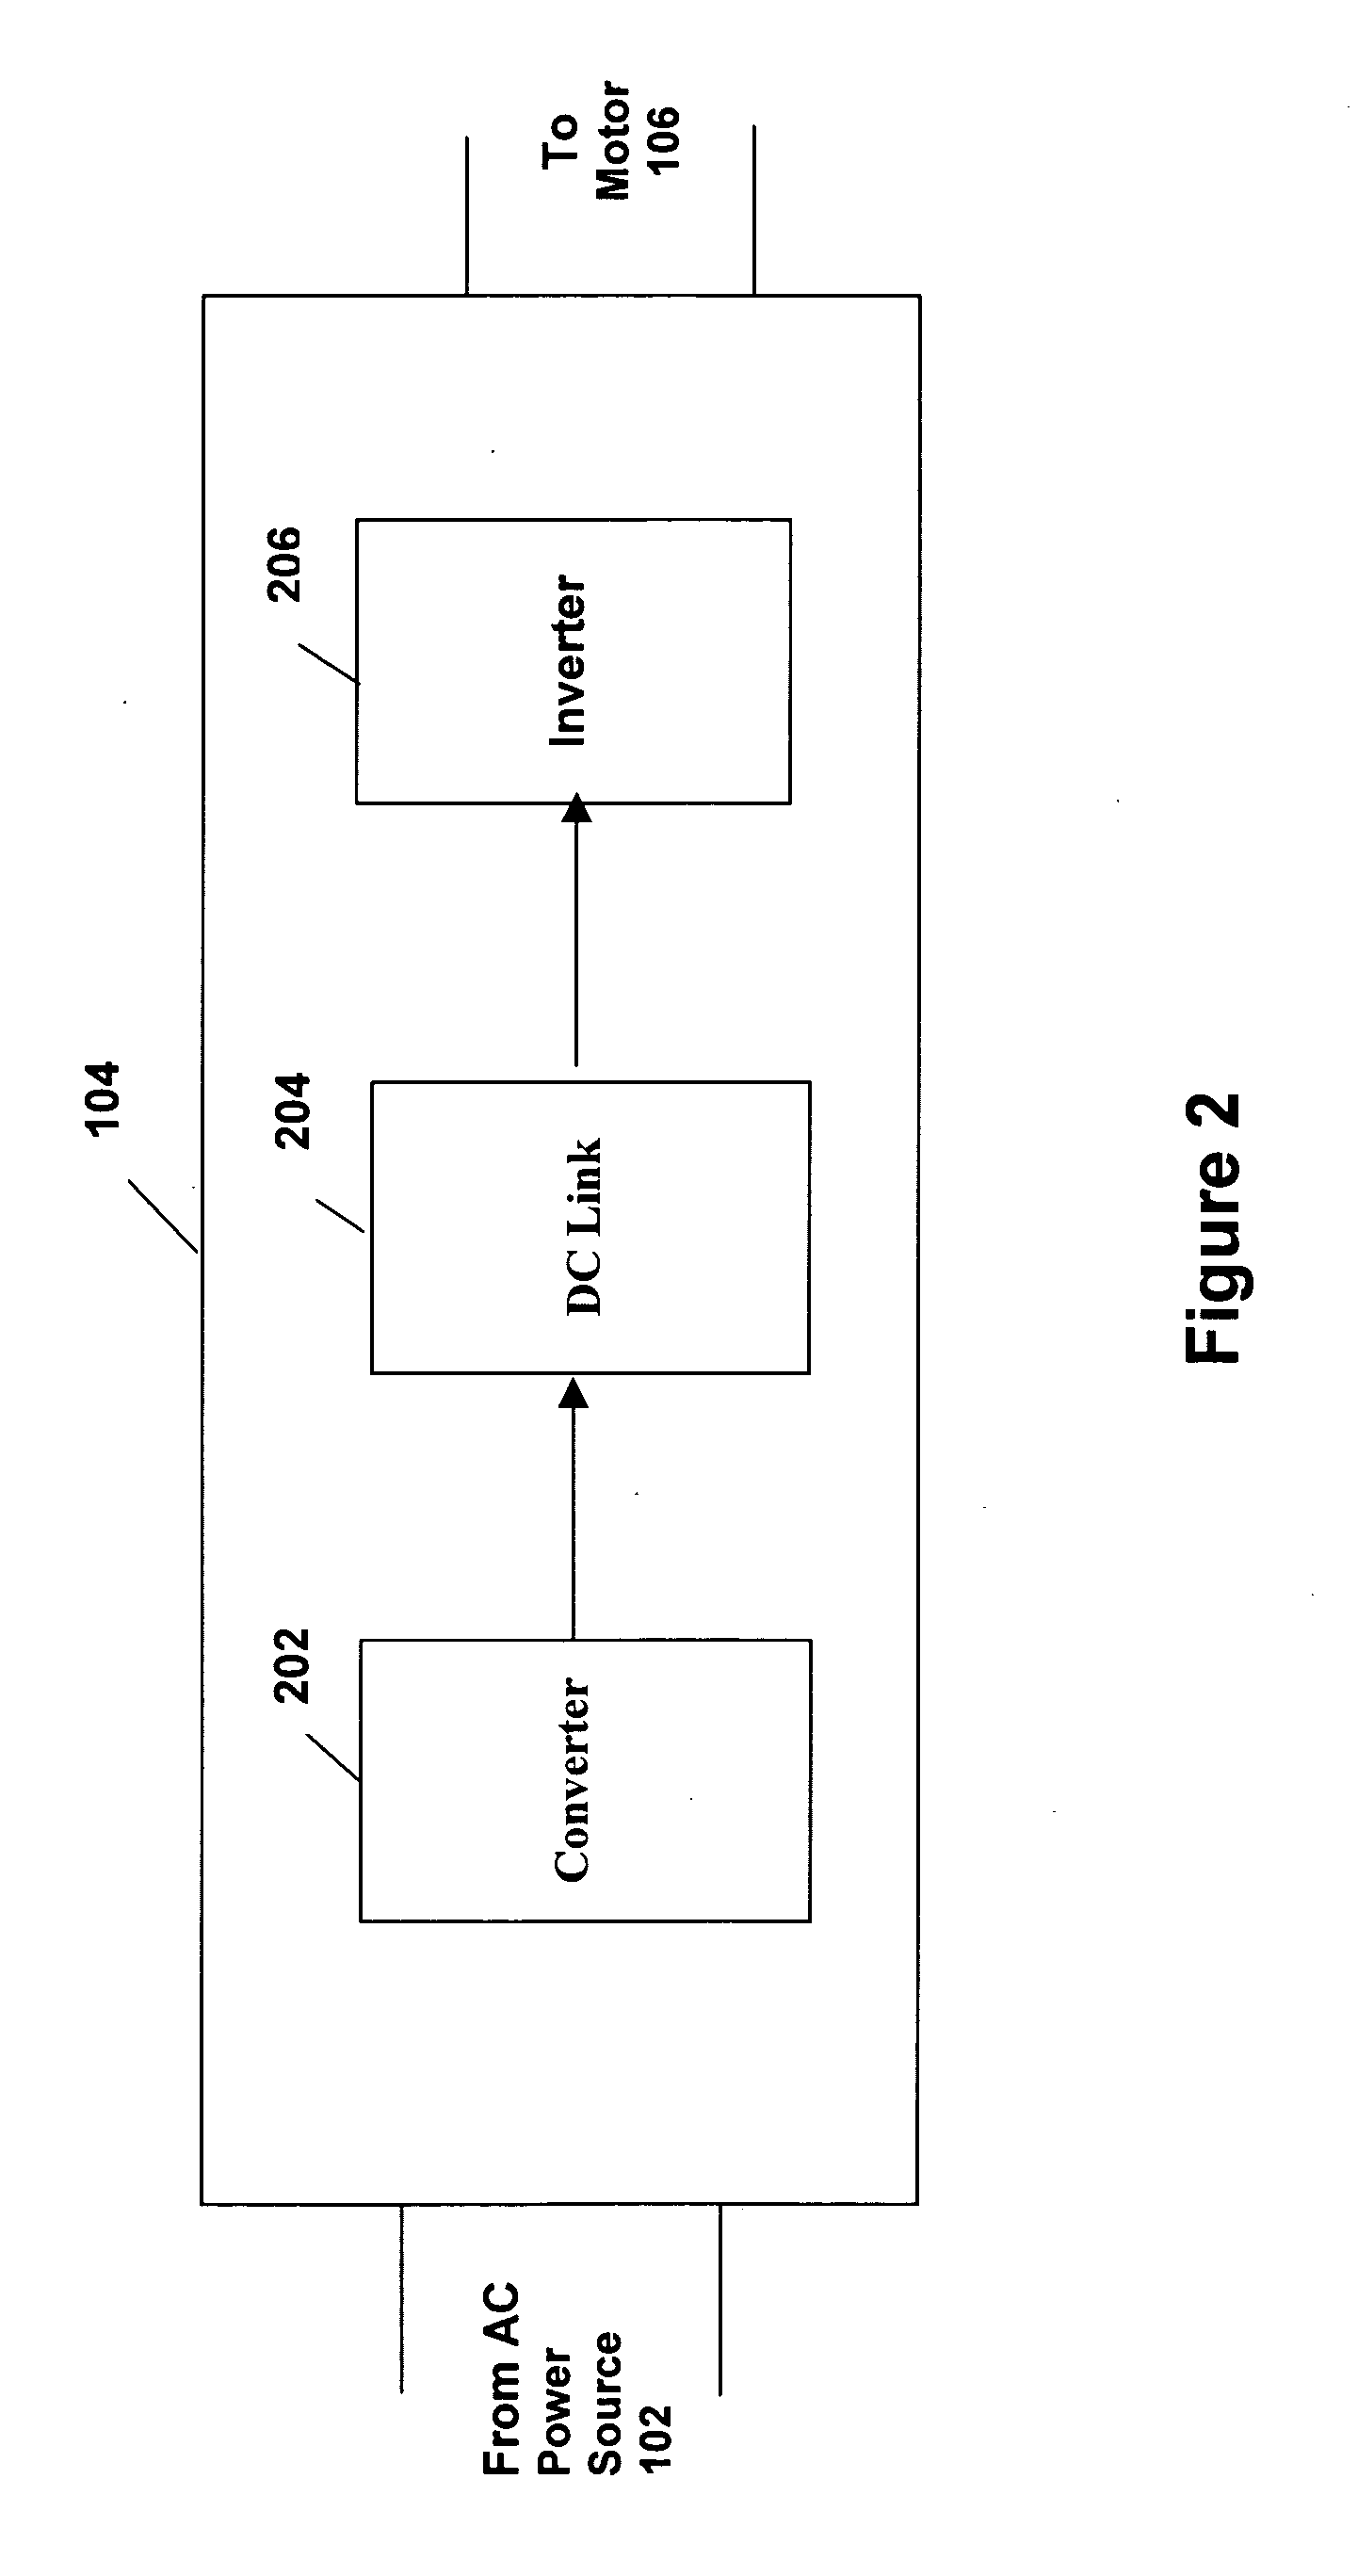 System and method for variable speed operation of a screw compressor